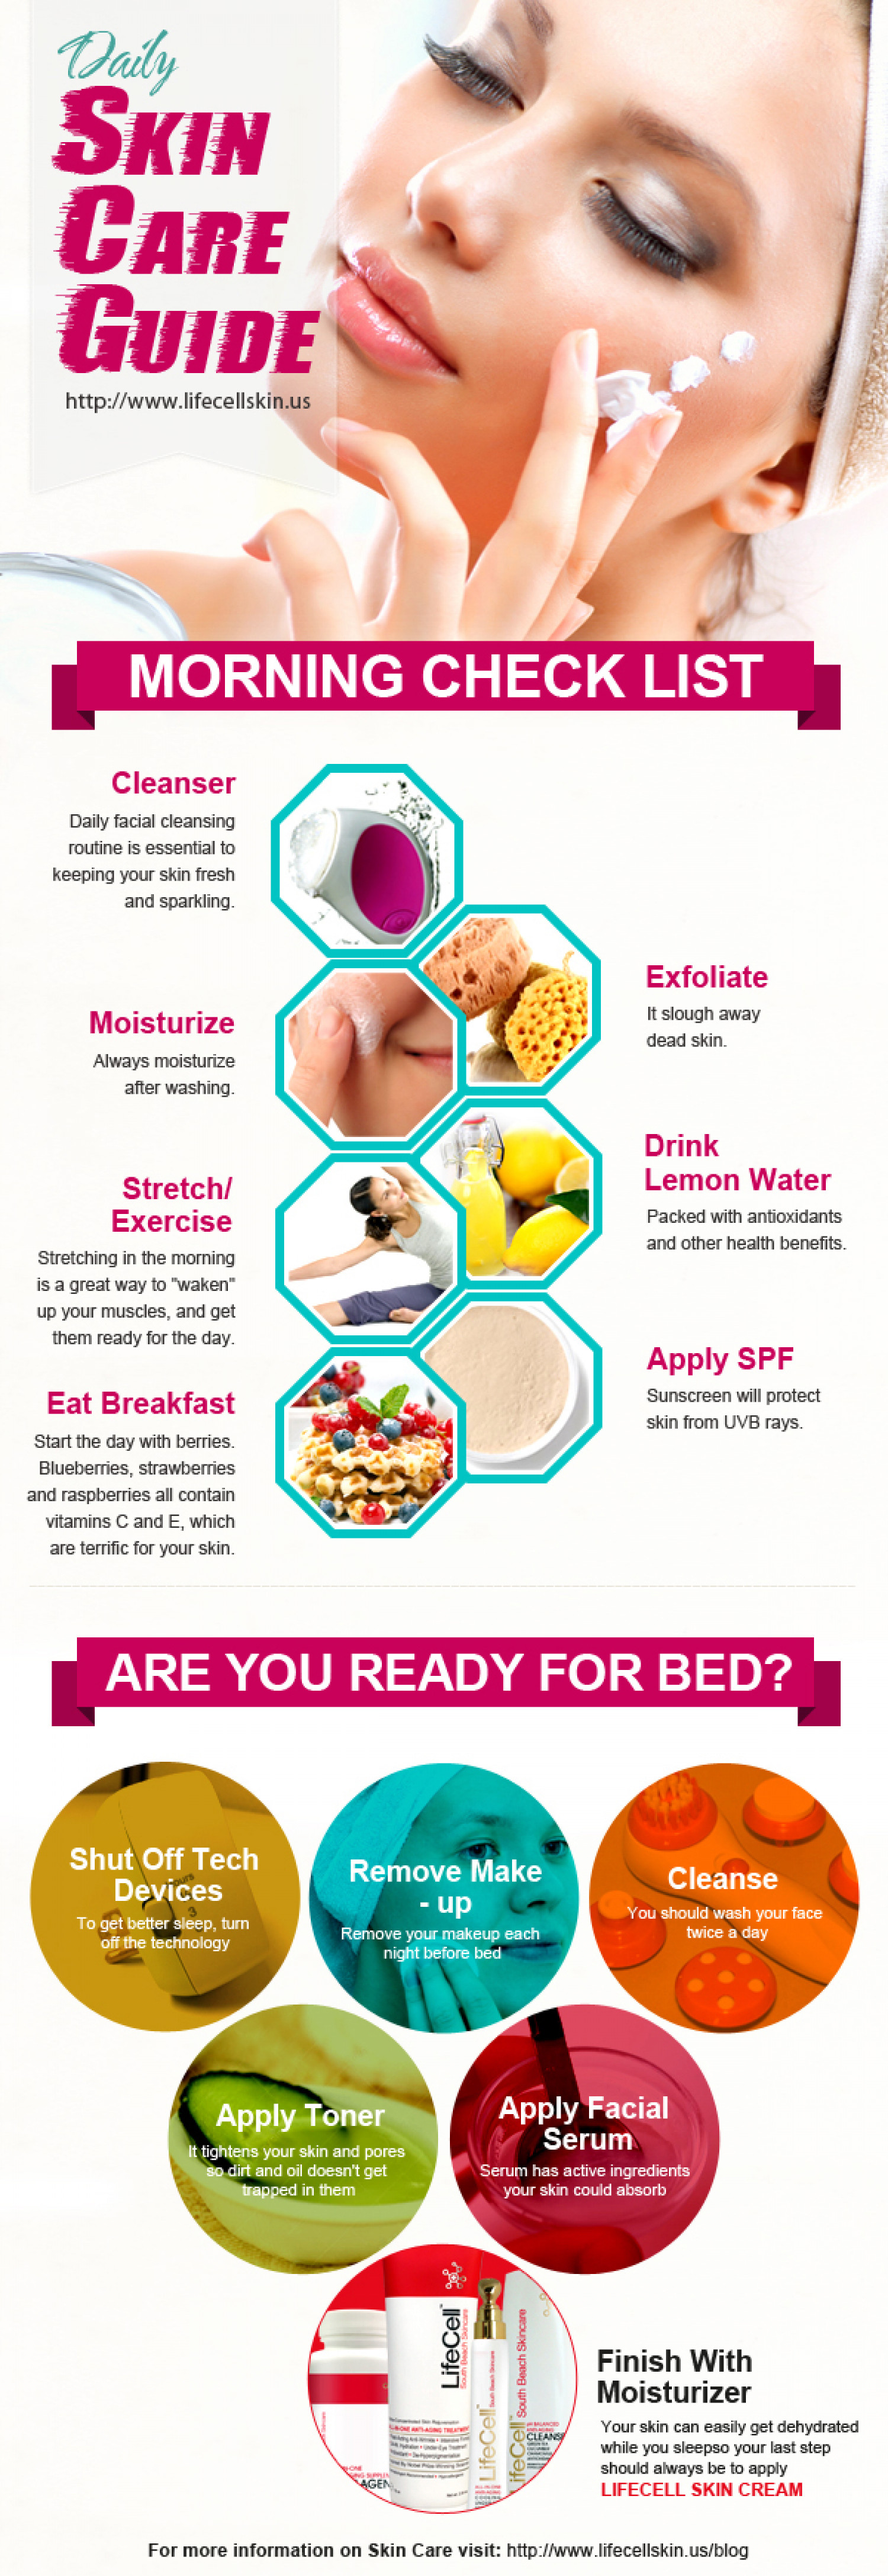  Daily Skin Care Guide Infographic